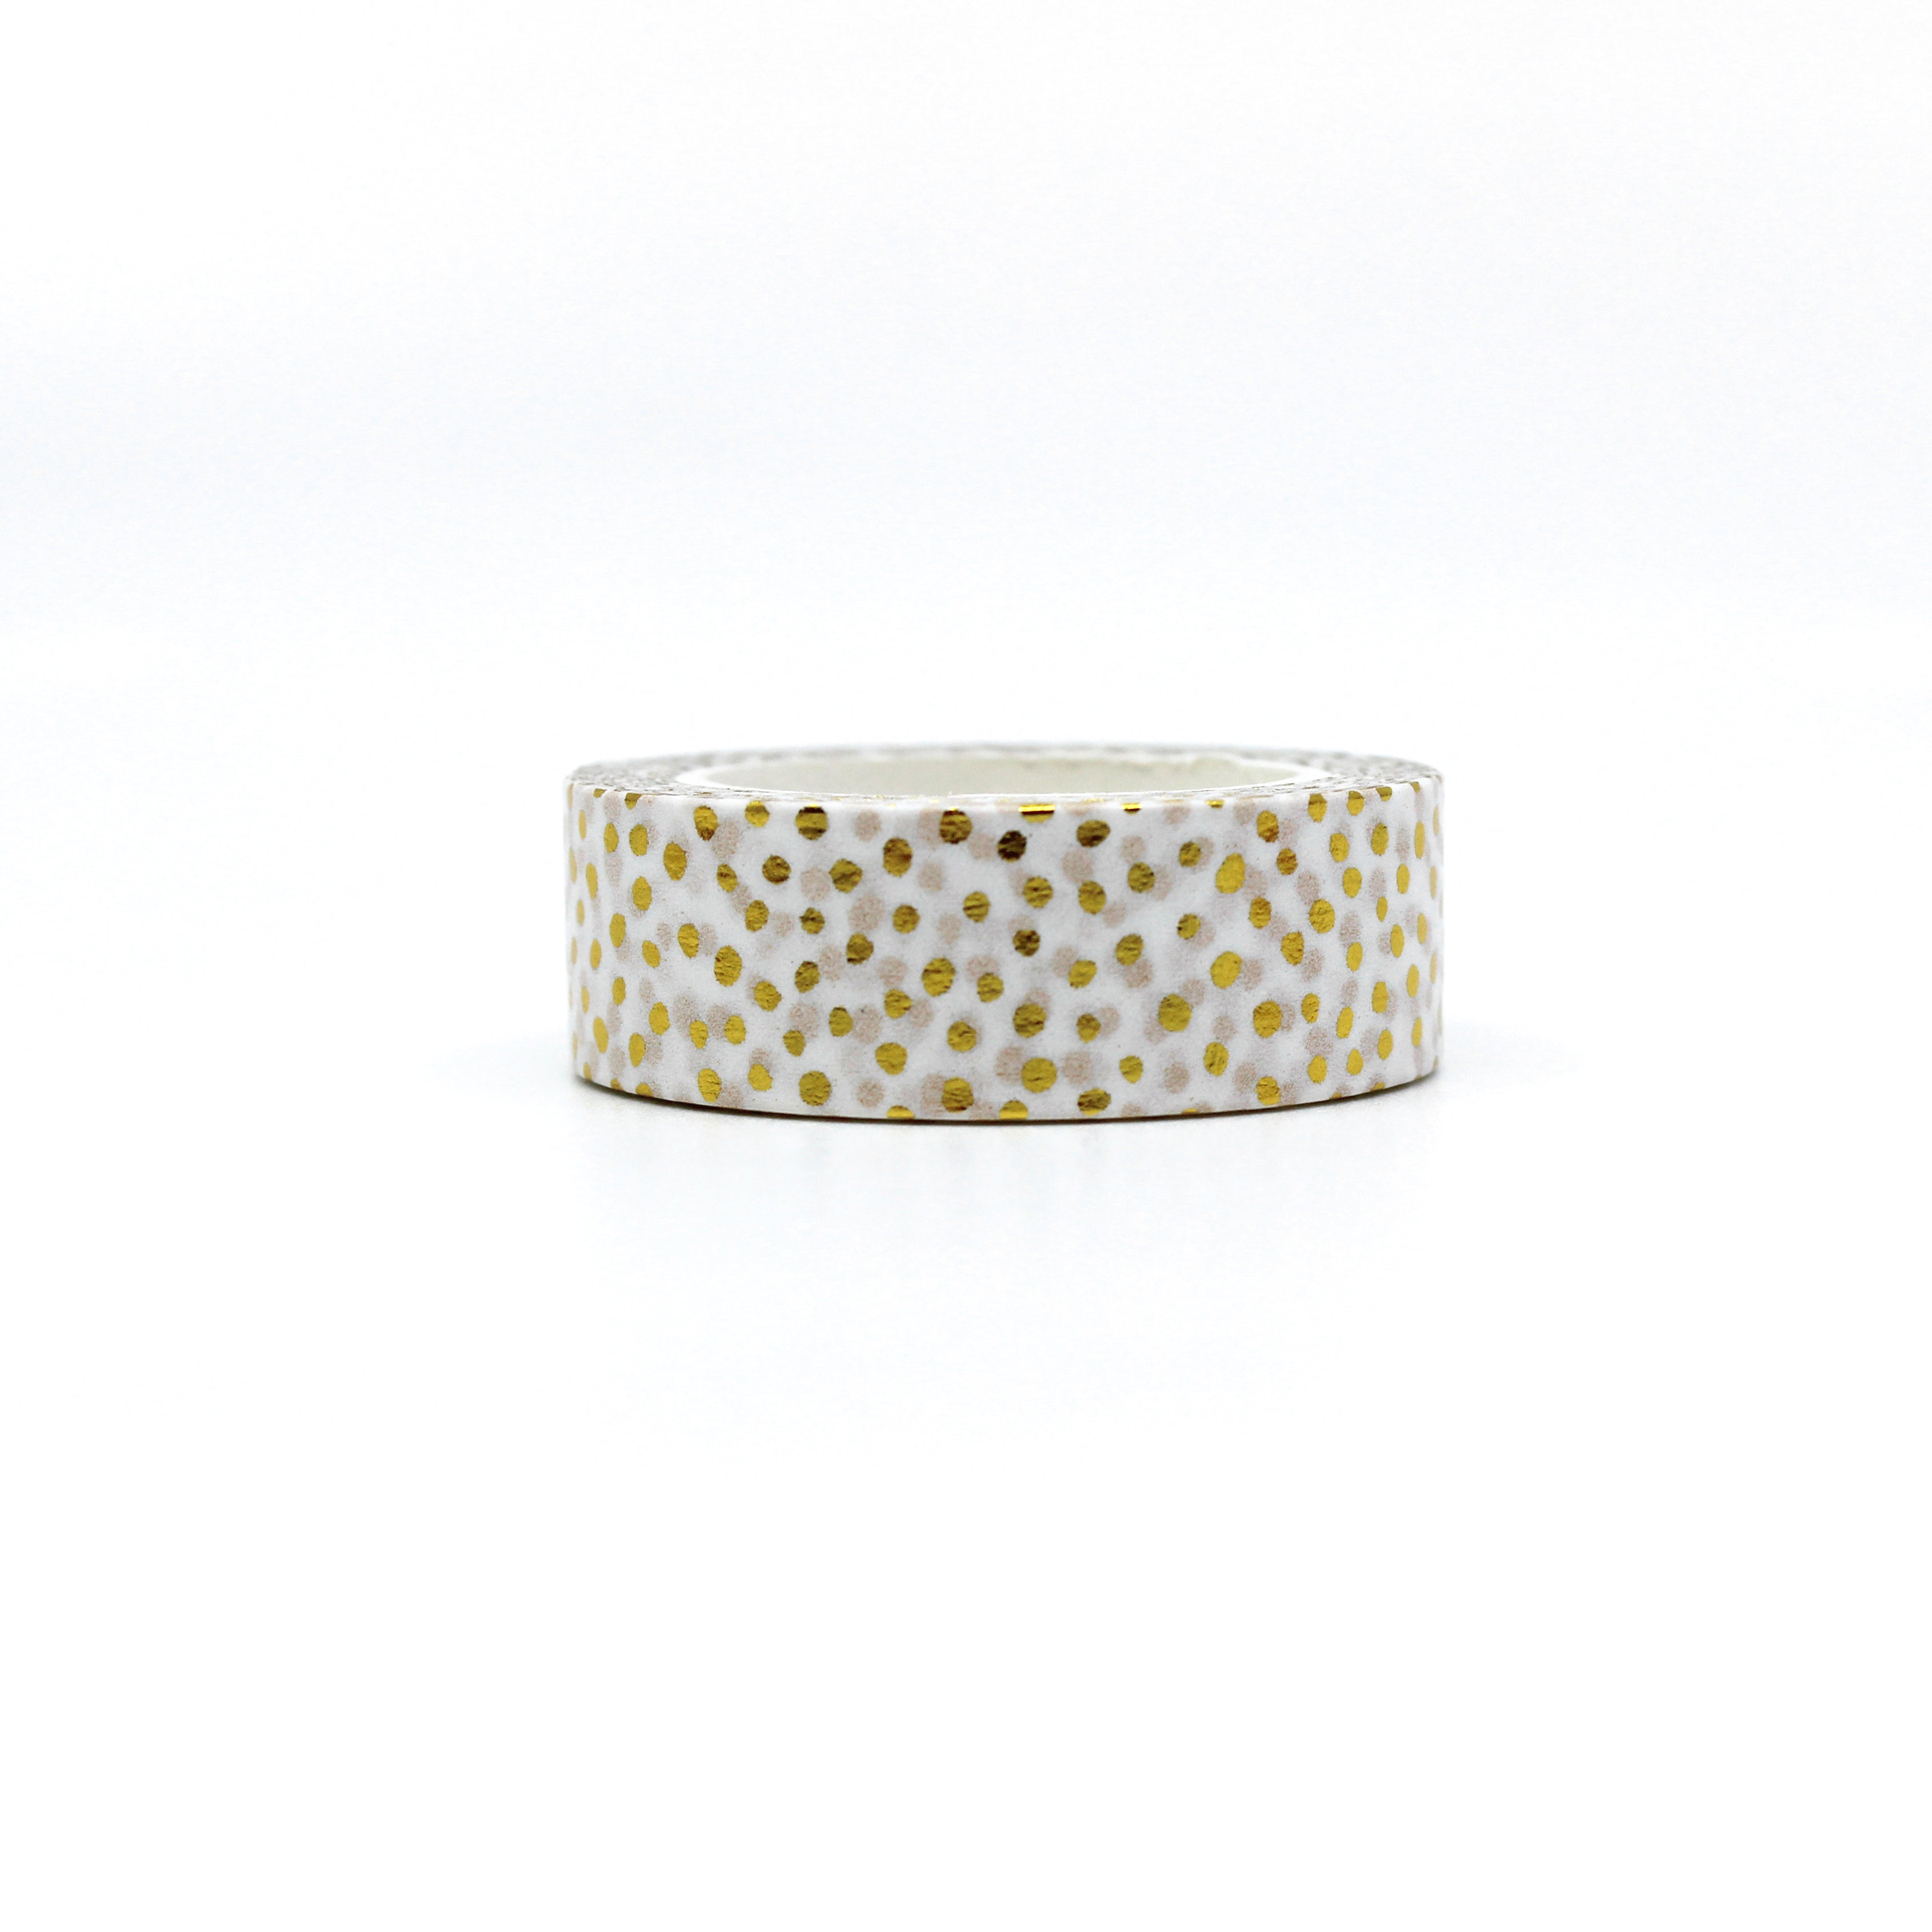 Elevate your crafts with our glamorous gold foil dotted washi tape adorned with playful polka dots and shimmering party confetti, perfect for adding a touch of joy and excitement. This tape is sold at BBB Supplies Craft Shop.